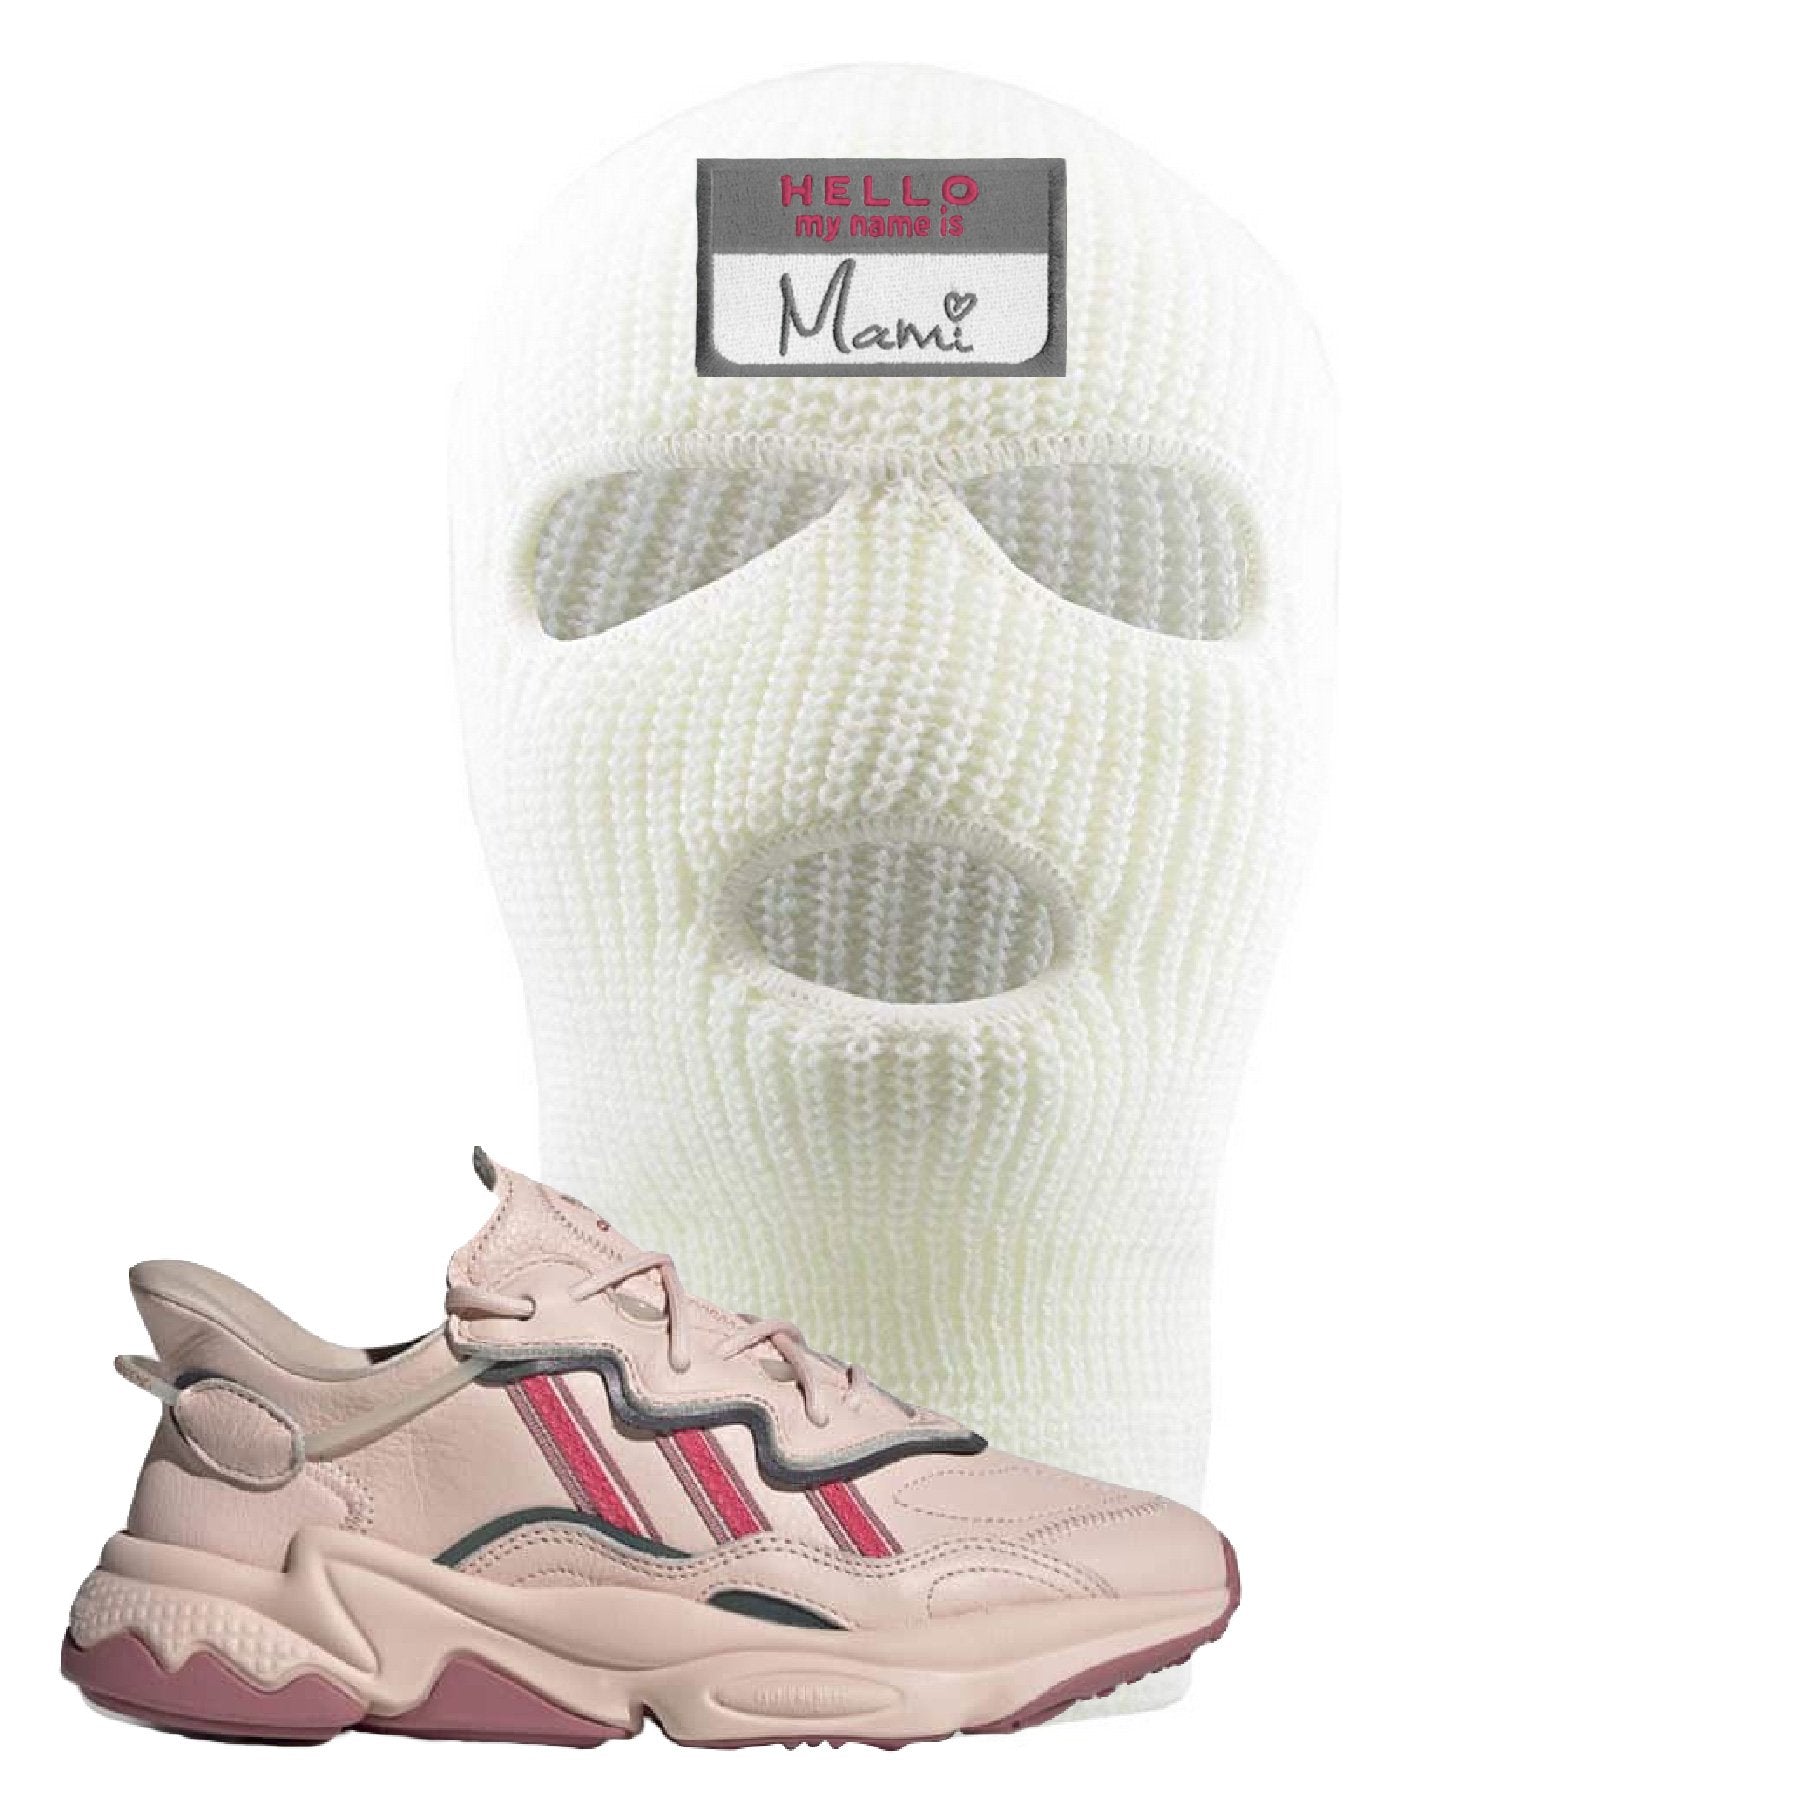 Adidas WMNS Ozweego Icy Pink Hello My Name is Mami White Sneaker Hook Up Ski Mask